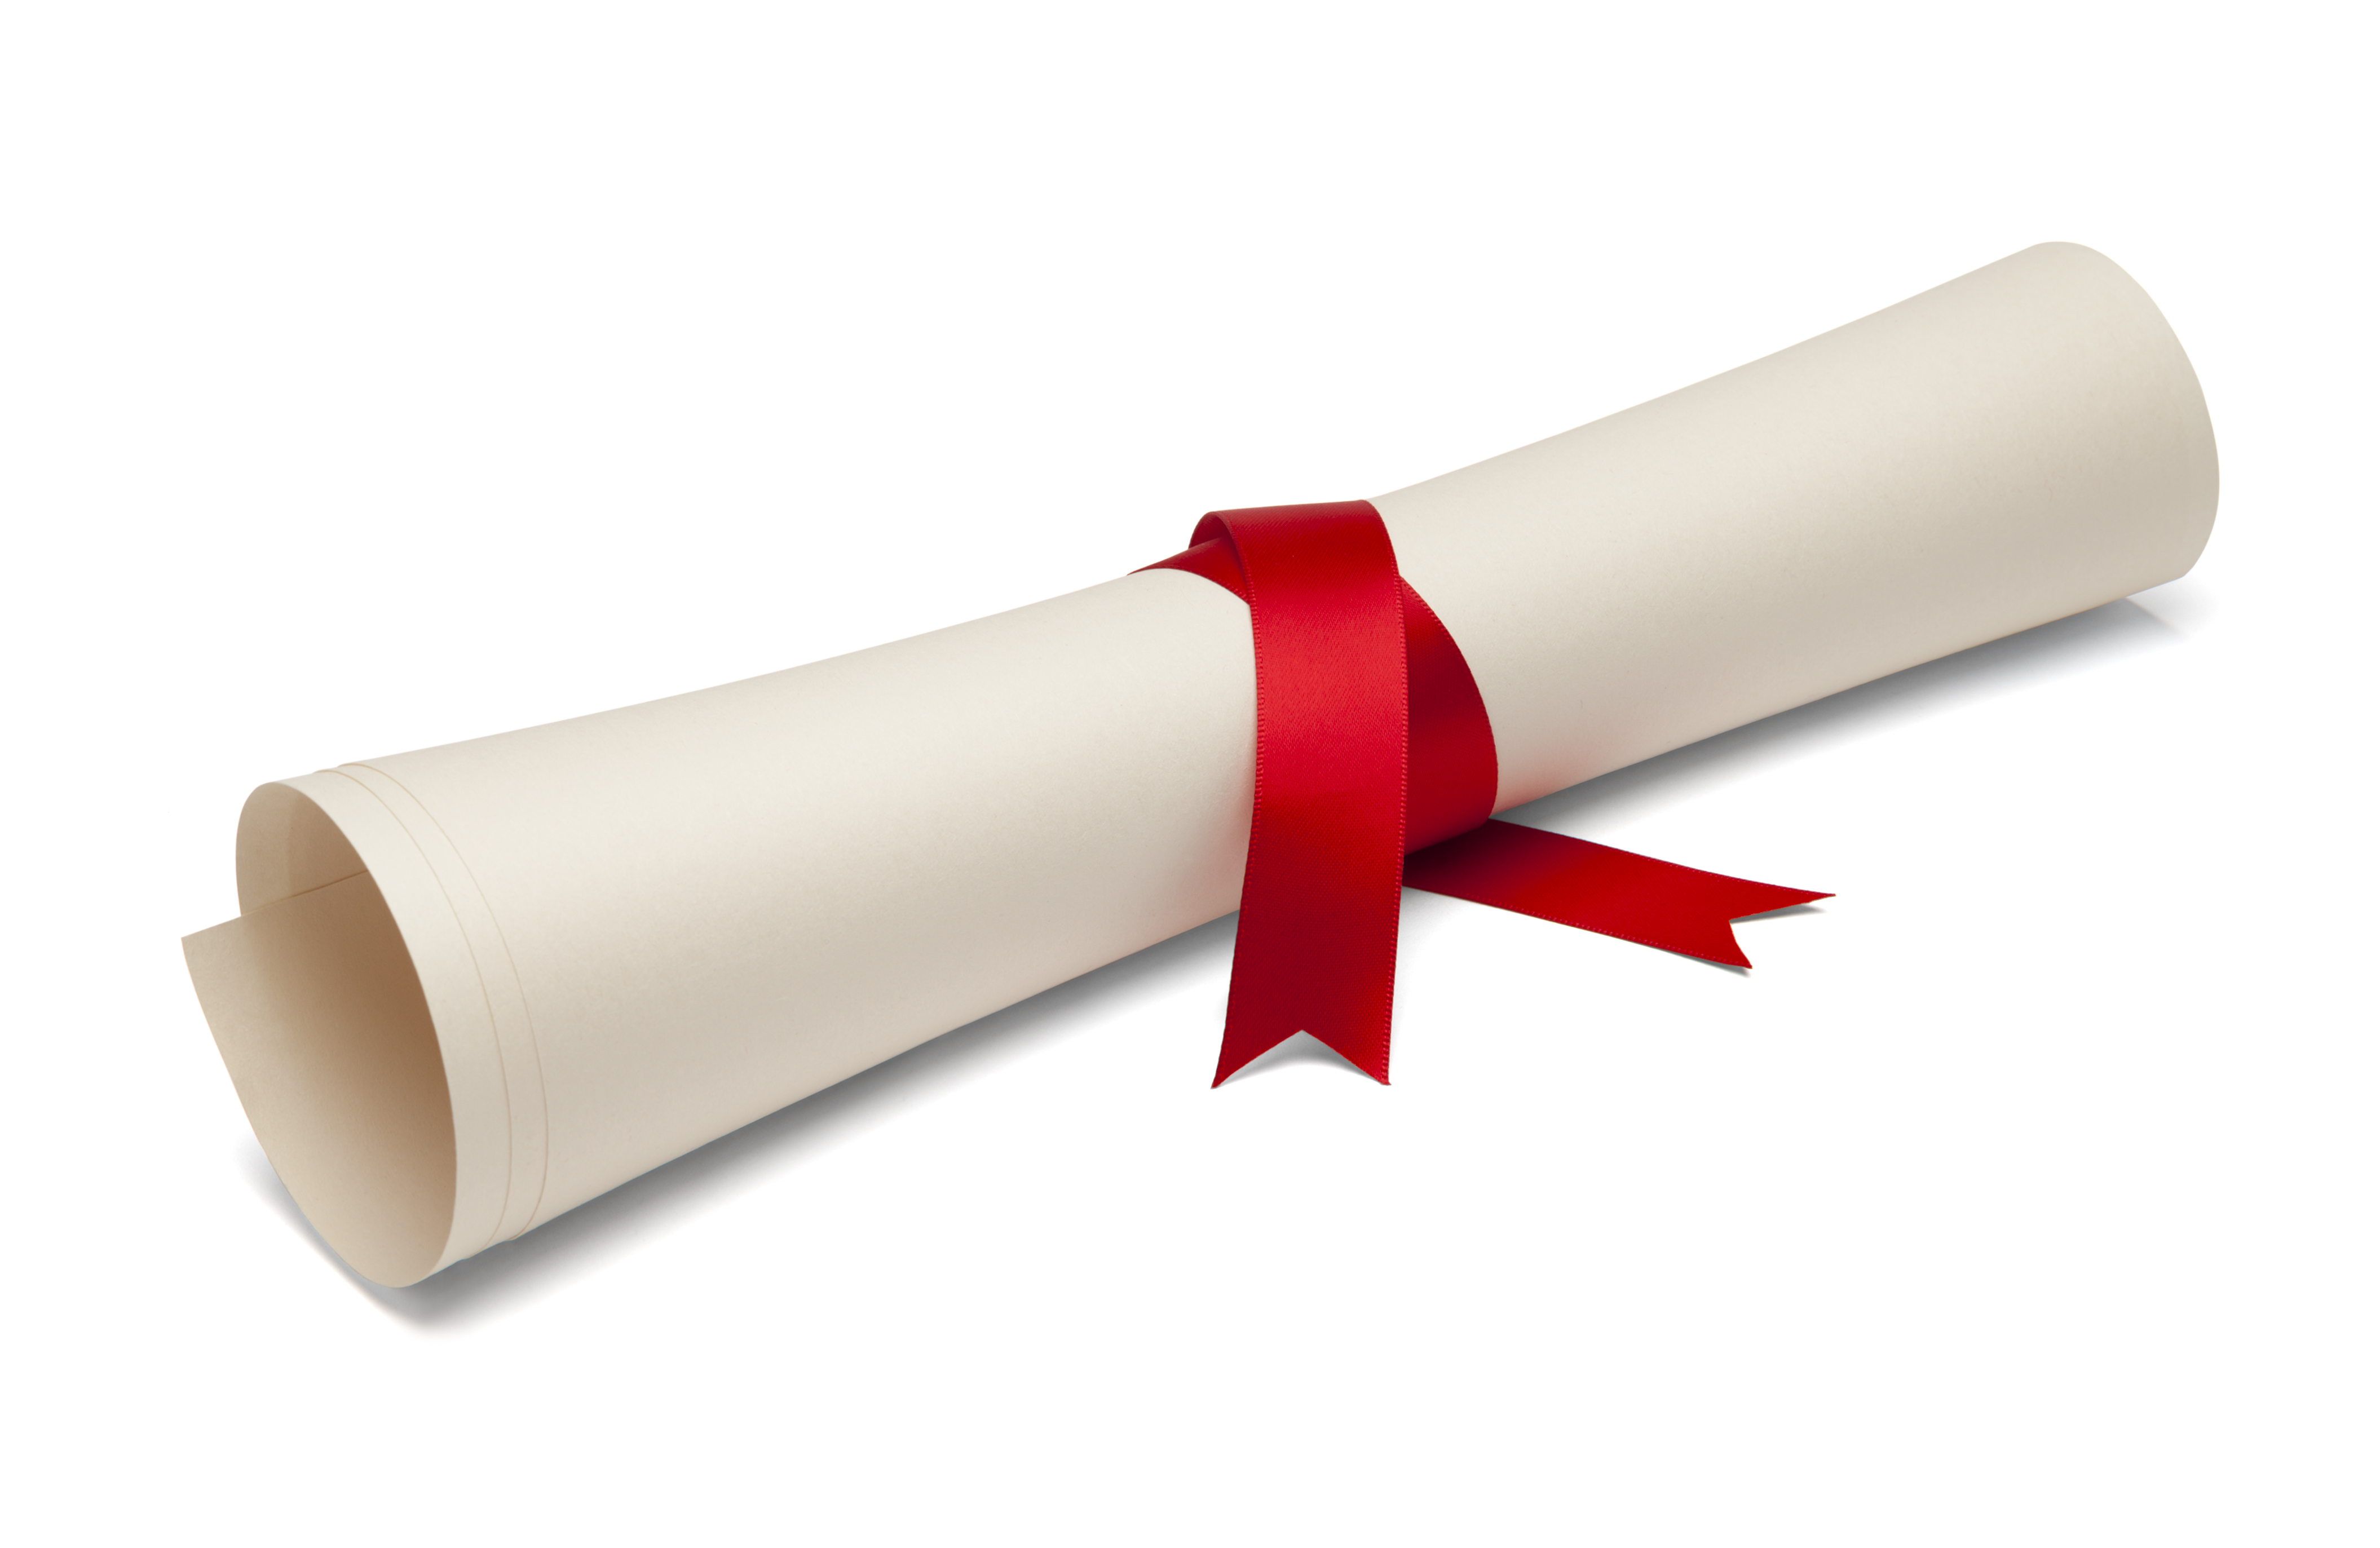 Rolled up diploma clipart 